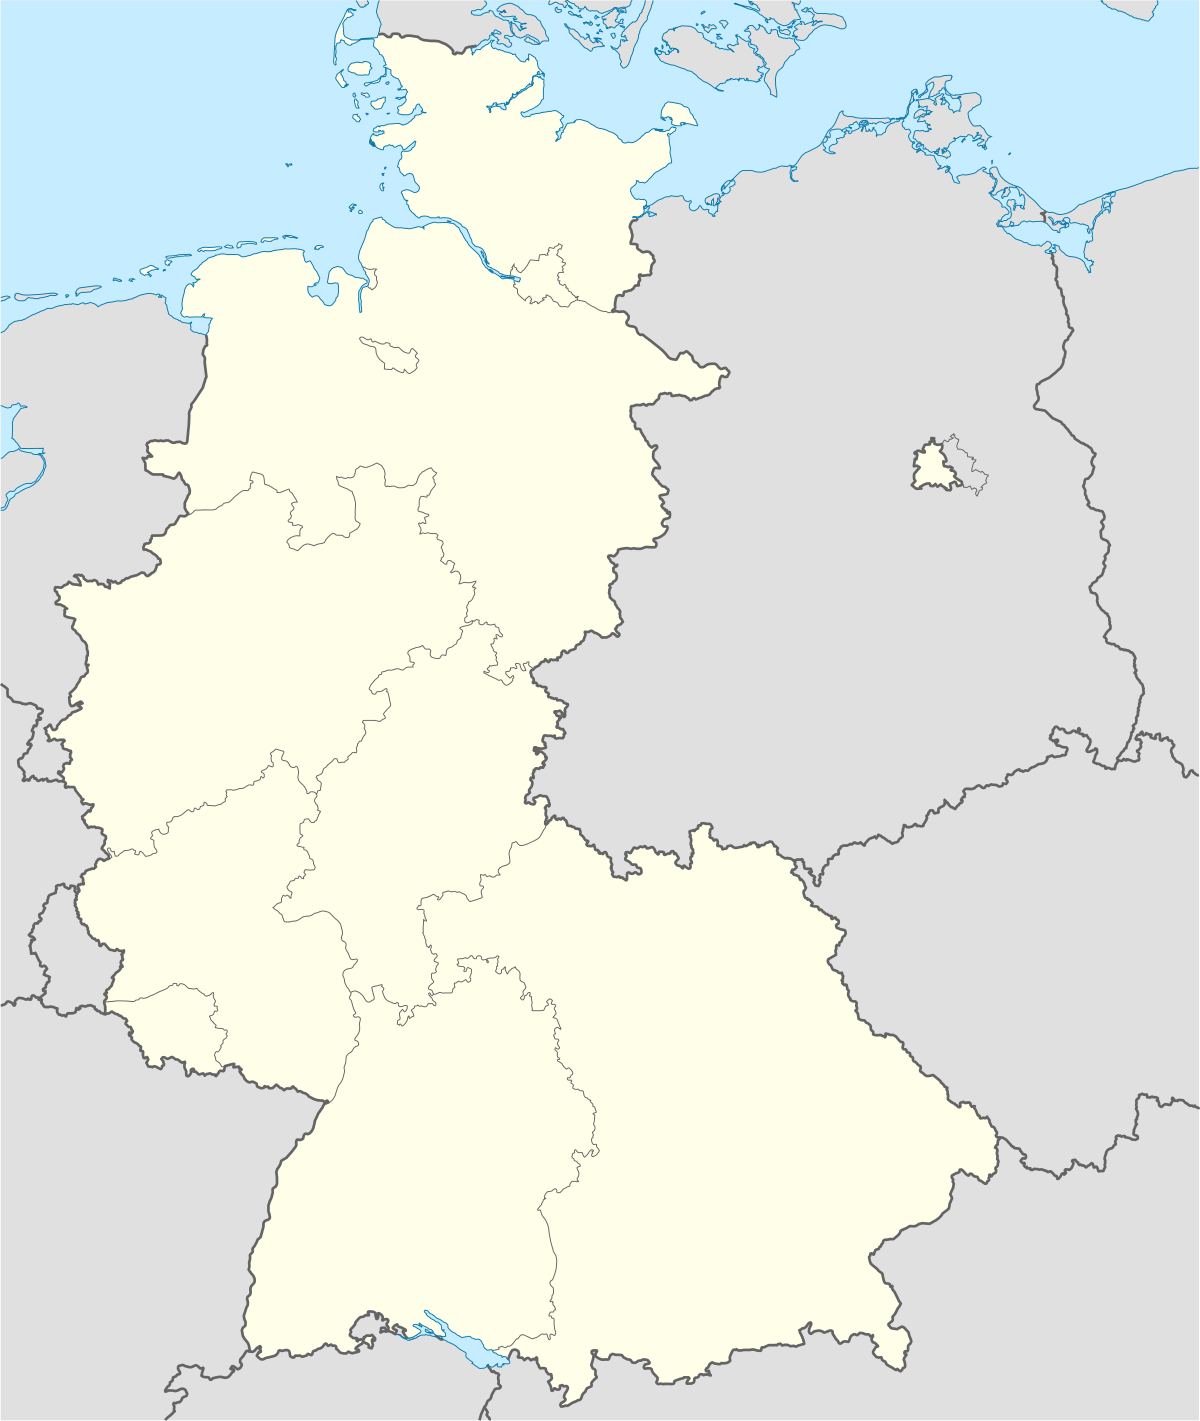 Noclador/sandbox/West Germany allied battalions in 1989 is located in FRG and West Berlin